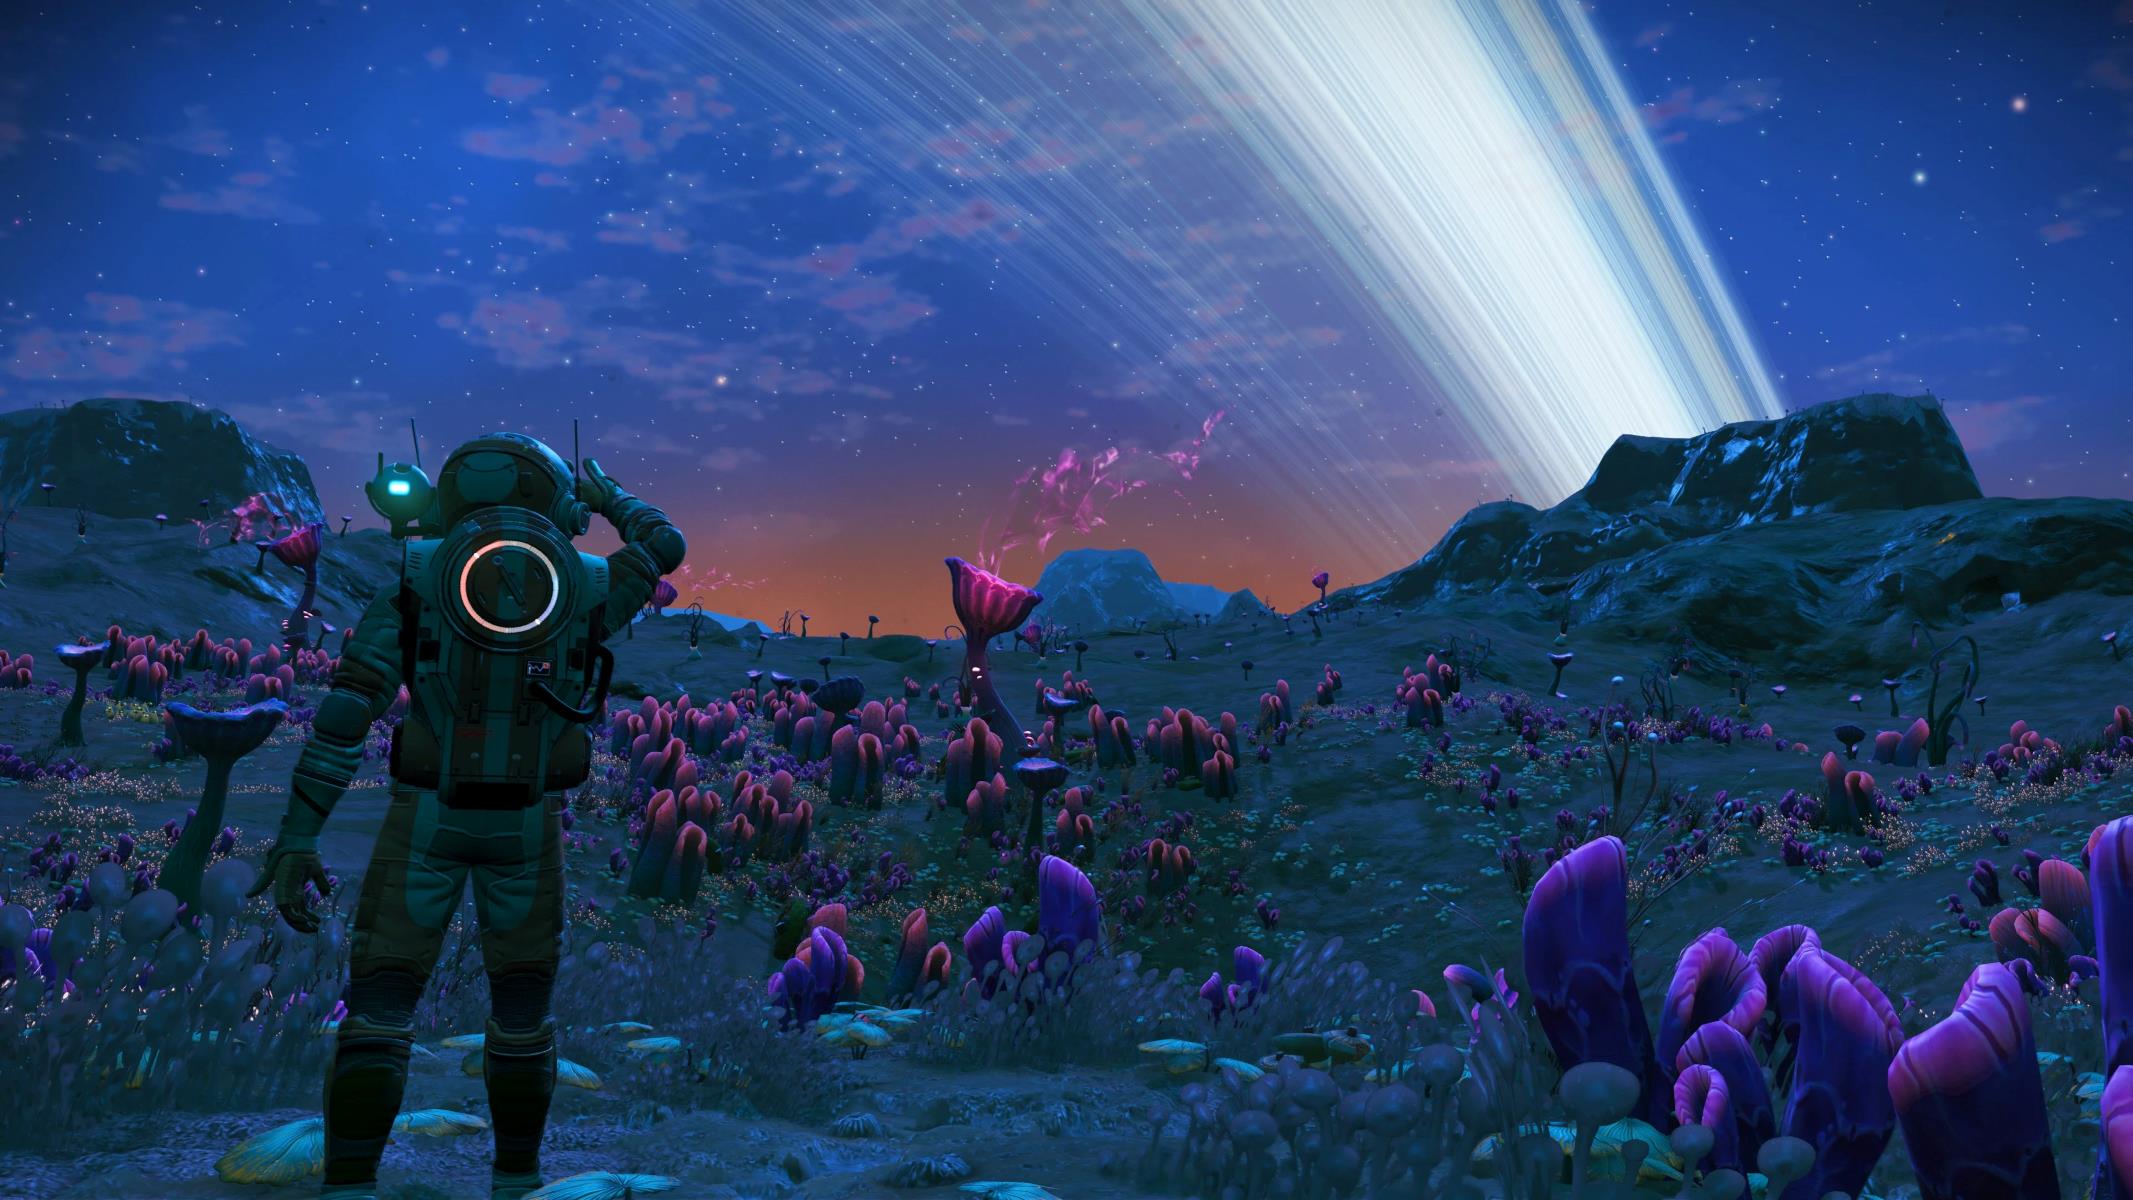 Immersive Gaming: Using Gamepad With No Man’s Sky On Oculus